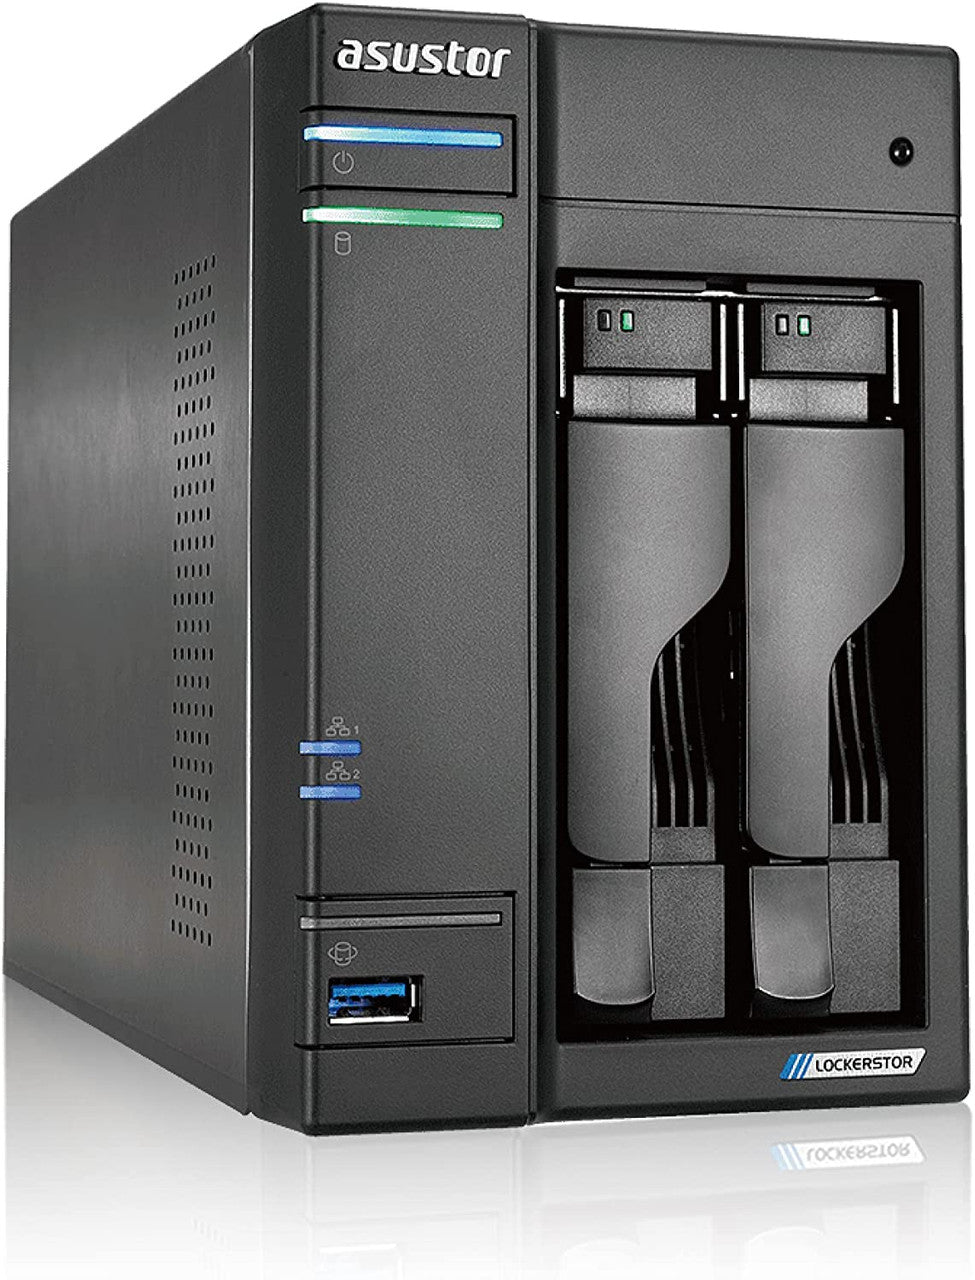 Asustor AS6602T 2-Bay Lockerstor 2 NAS with 4GB RAM and 8TB (2x4TB) Seagate Ironwolf PRO Drives